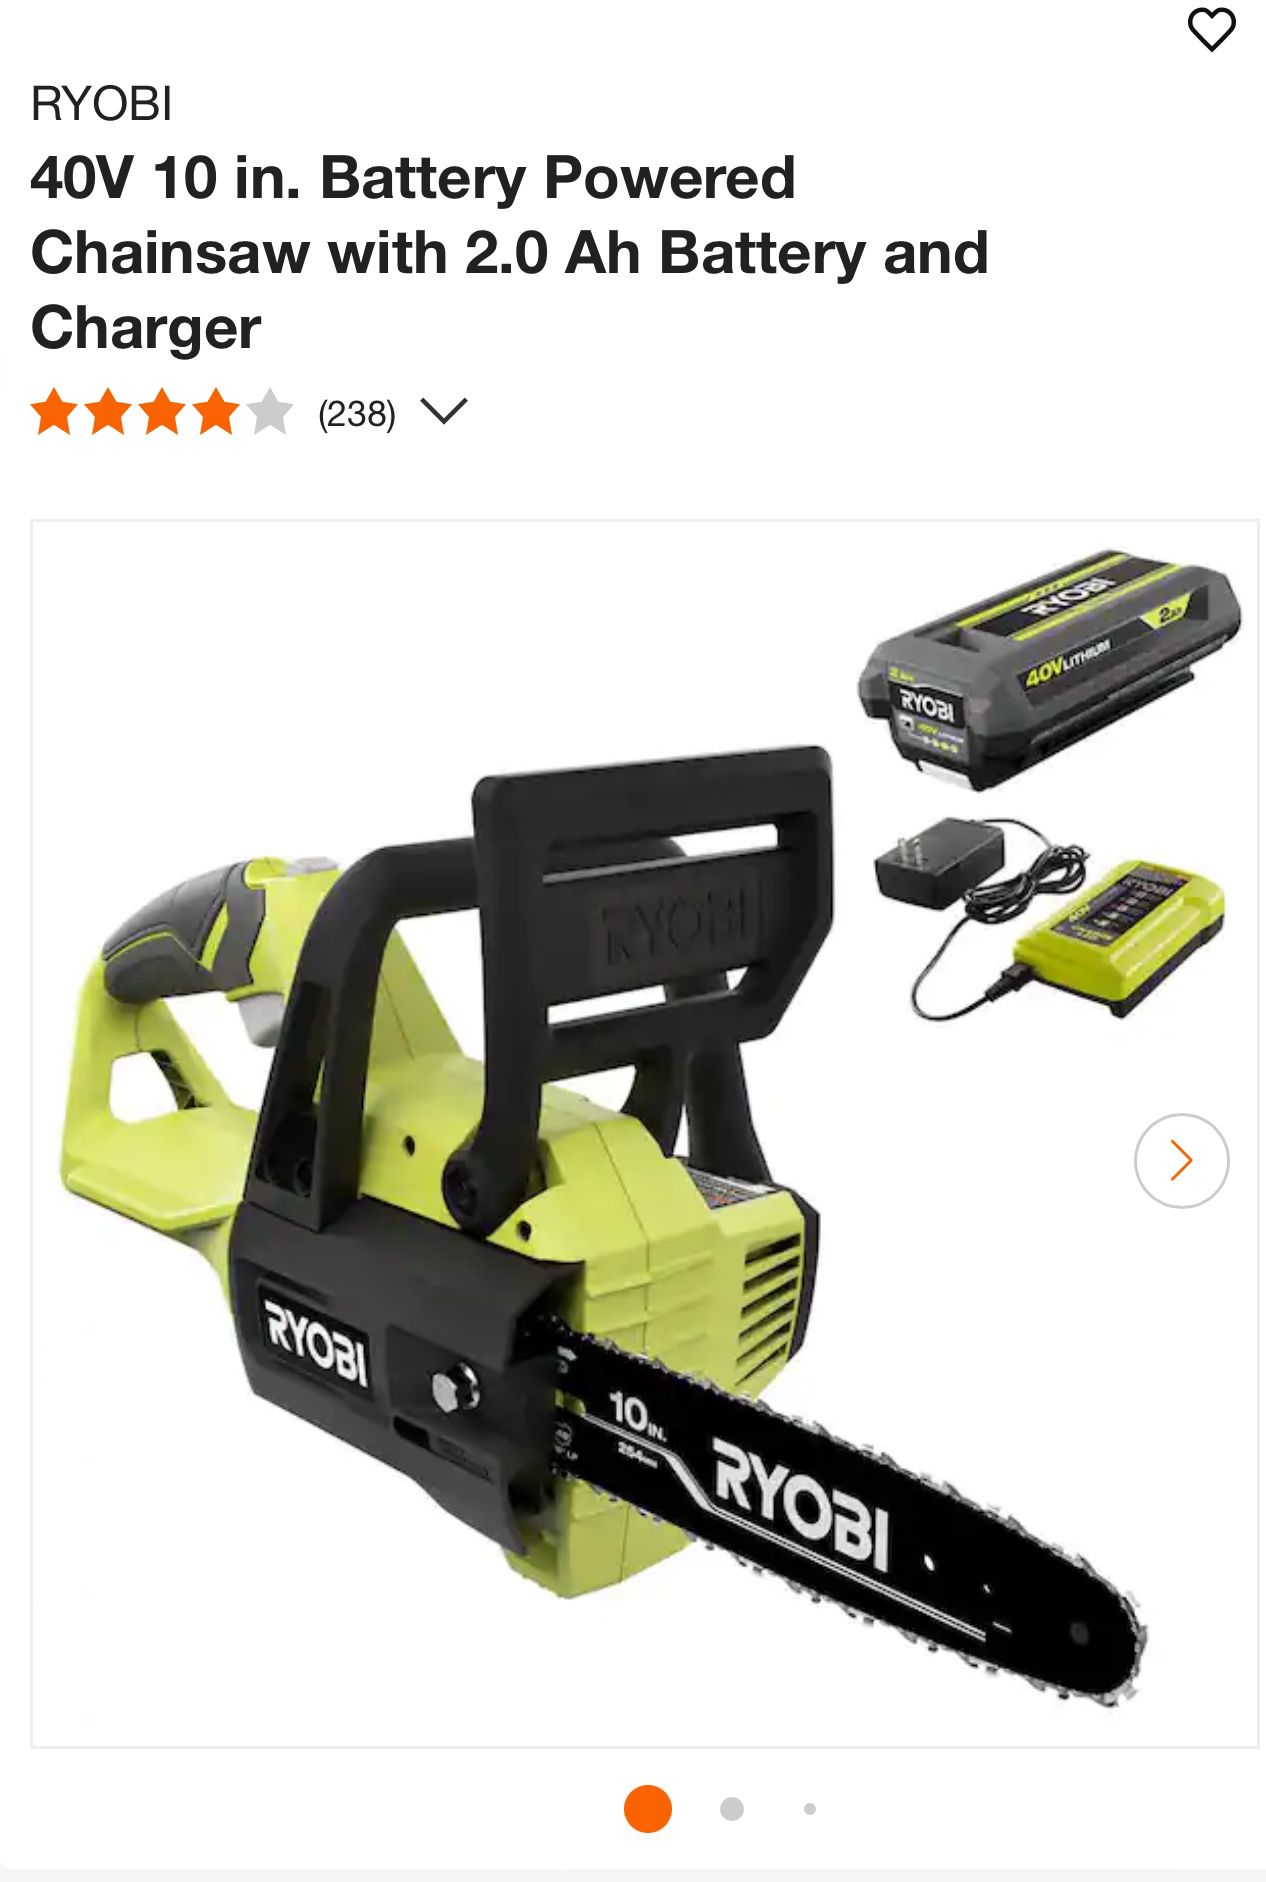 RYOBI 40V 10 in. Battery Powered Chainsaw with 2.0 Ah Battery and Charger